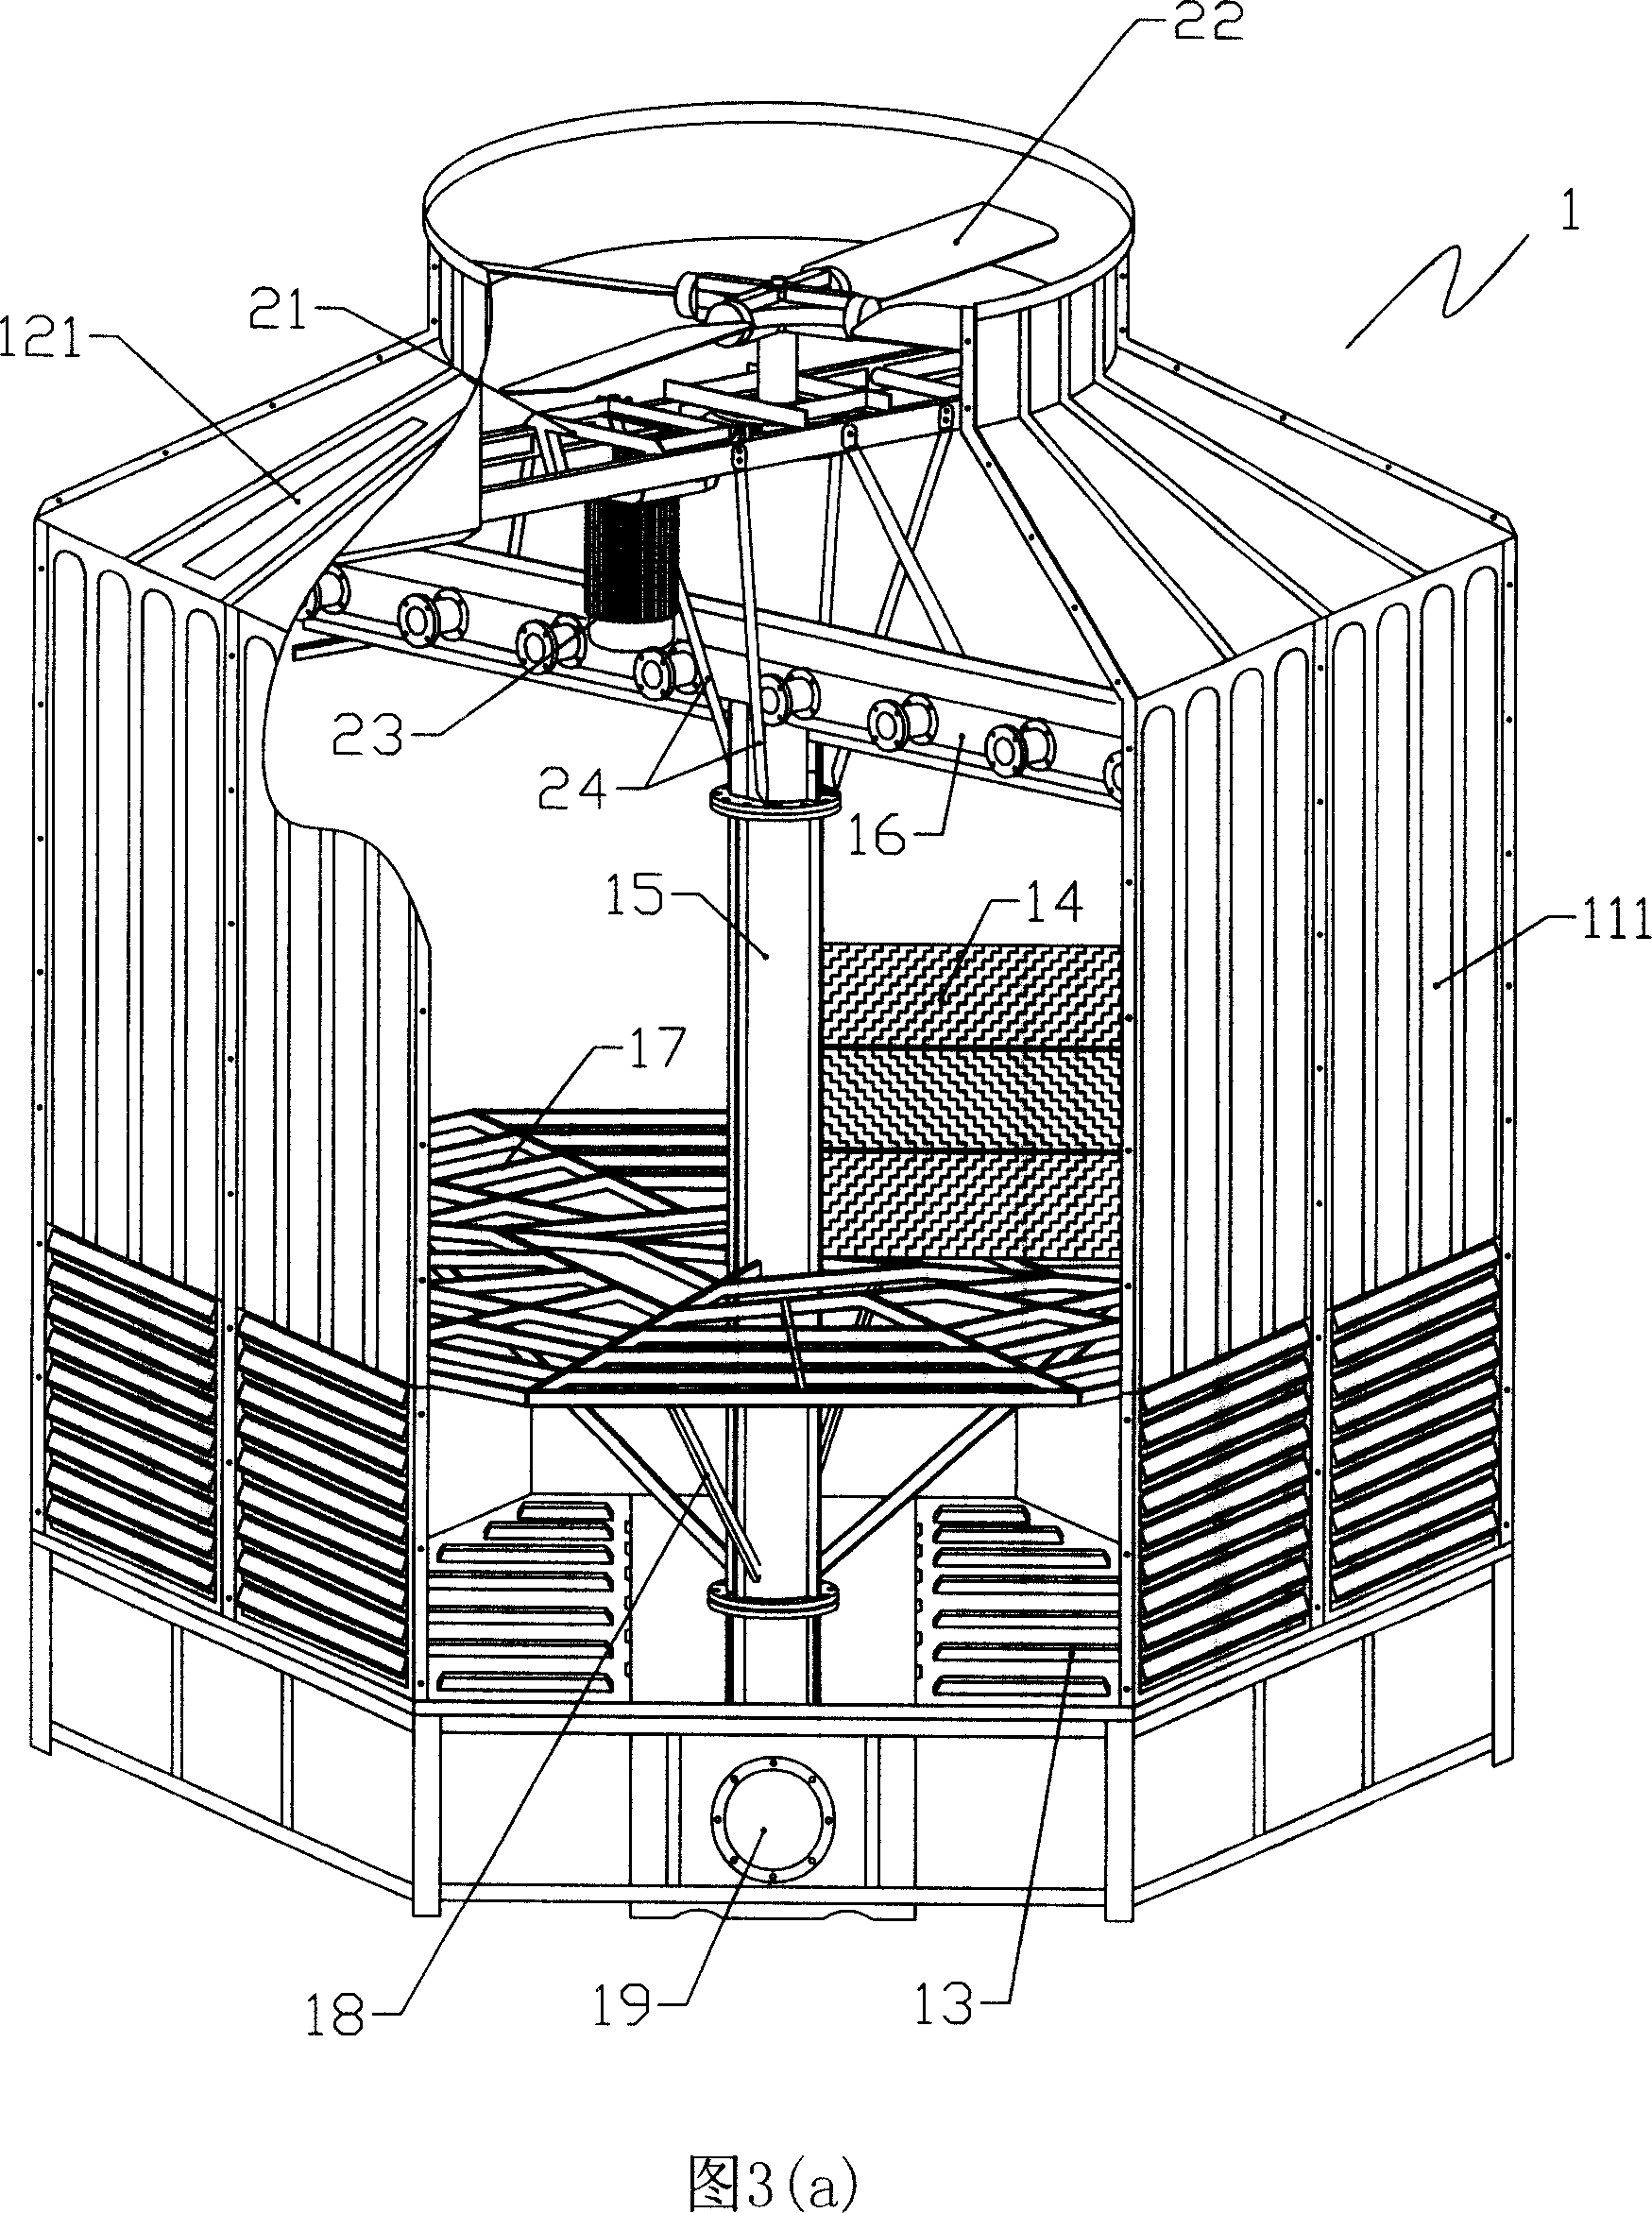 Polygonal counterflow type cooling tower